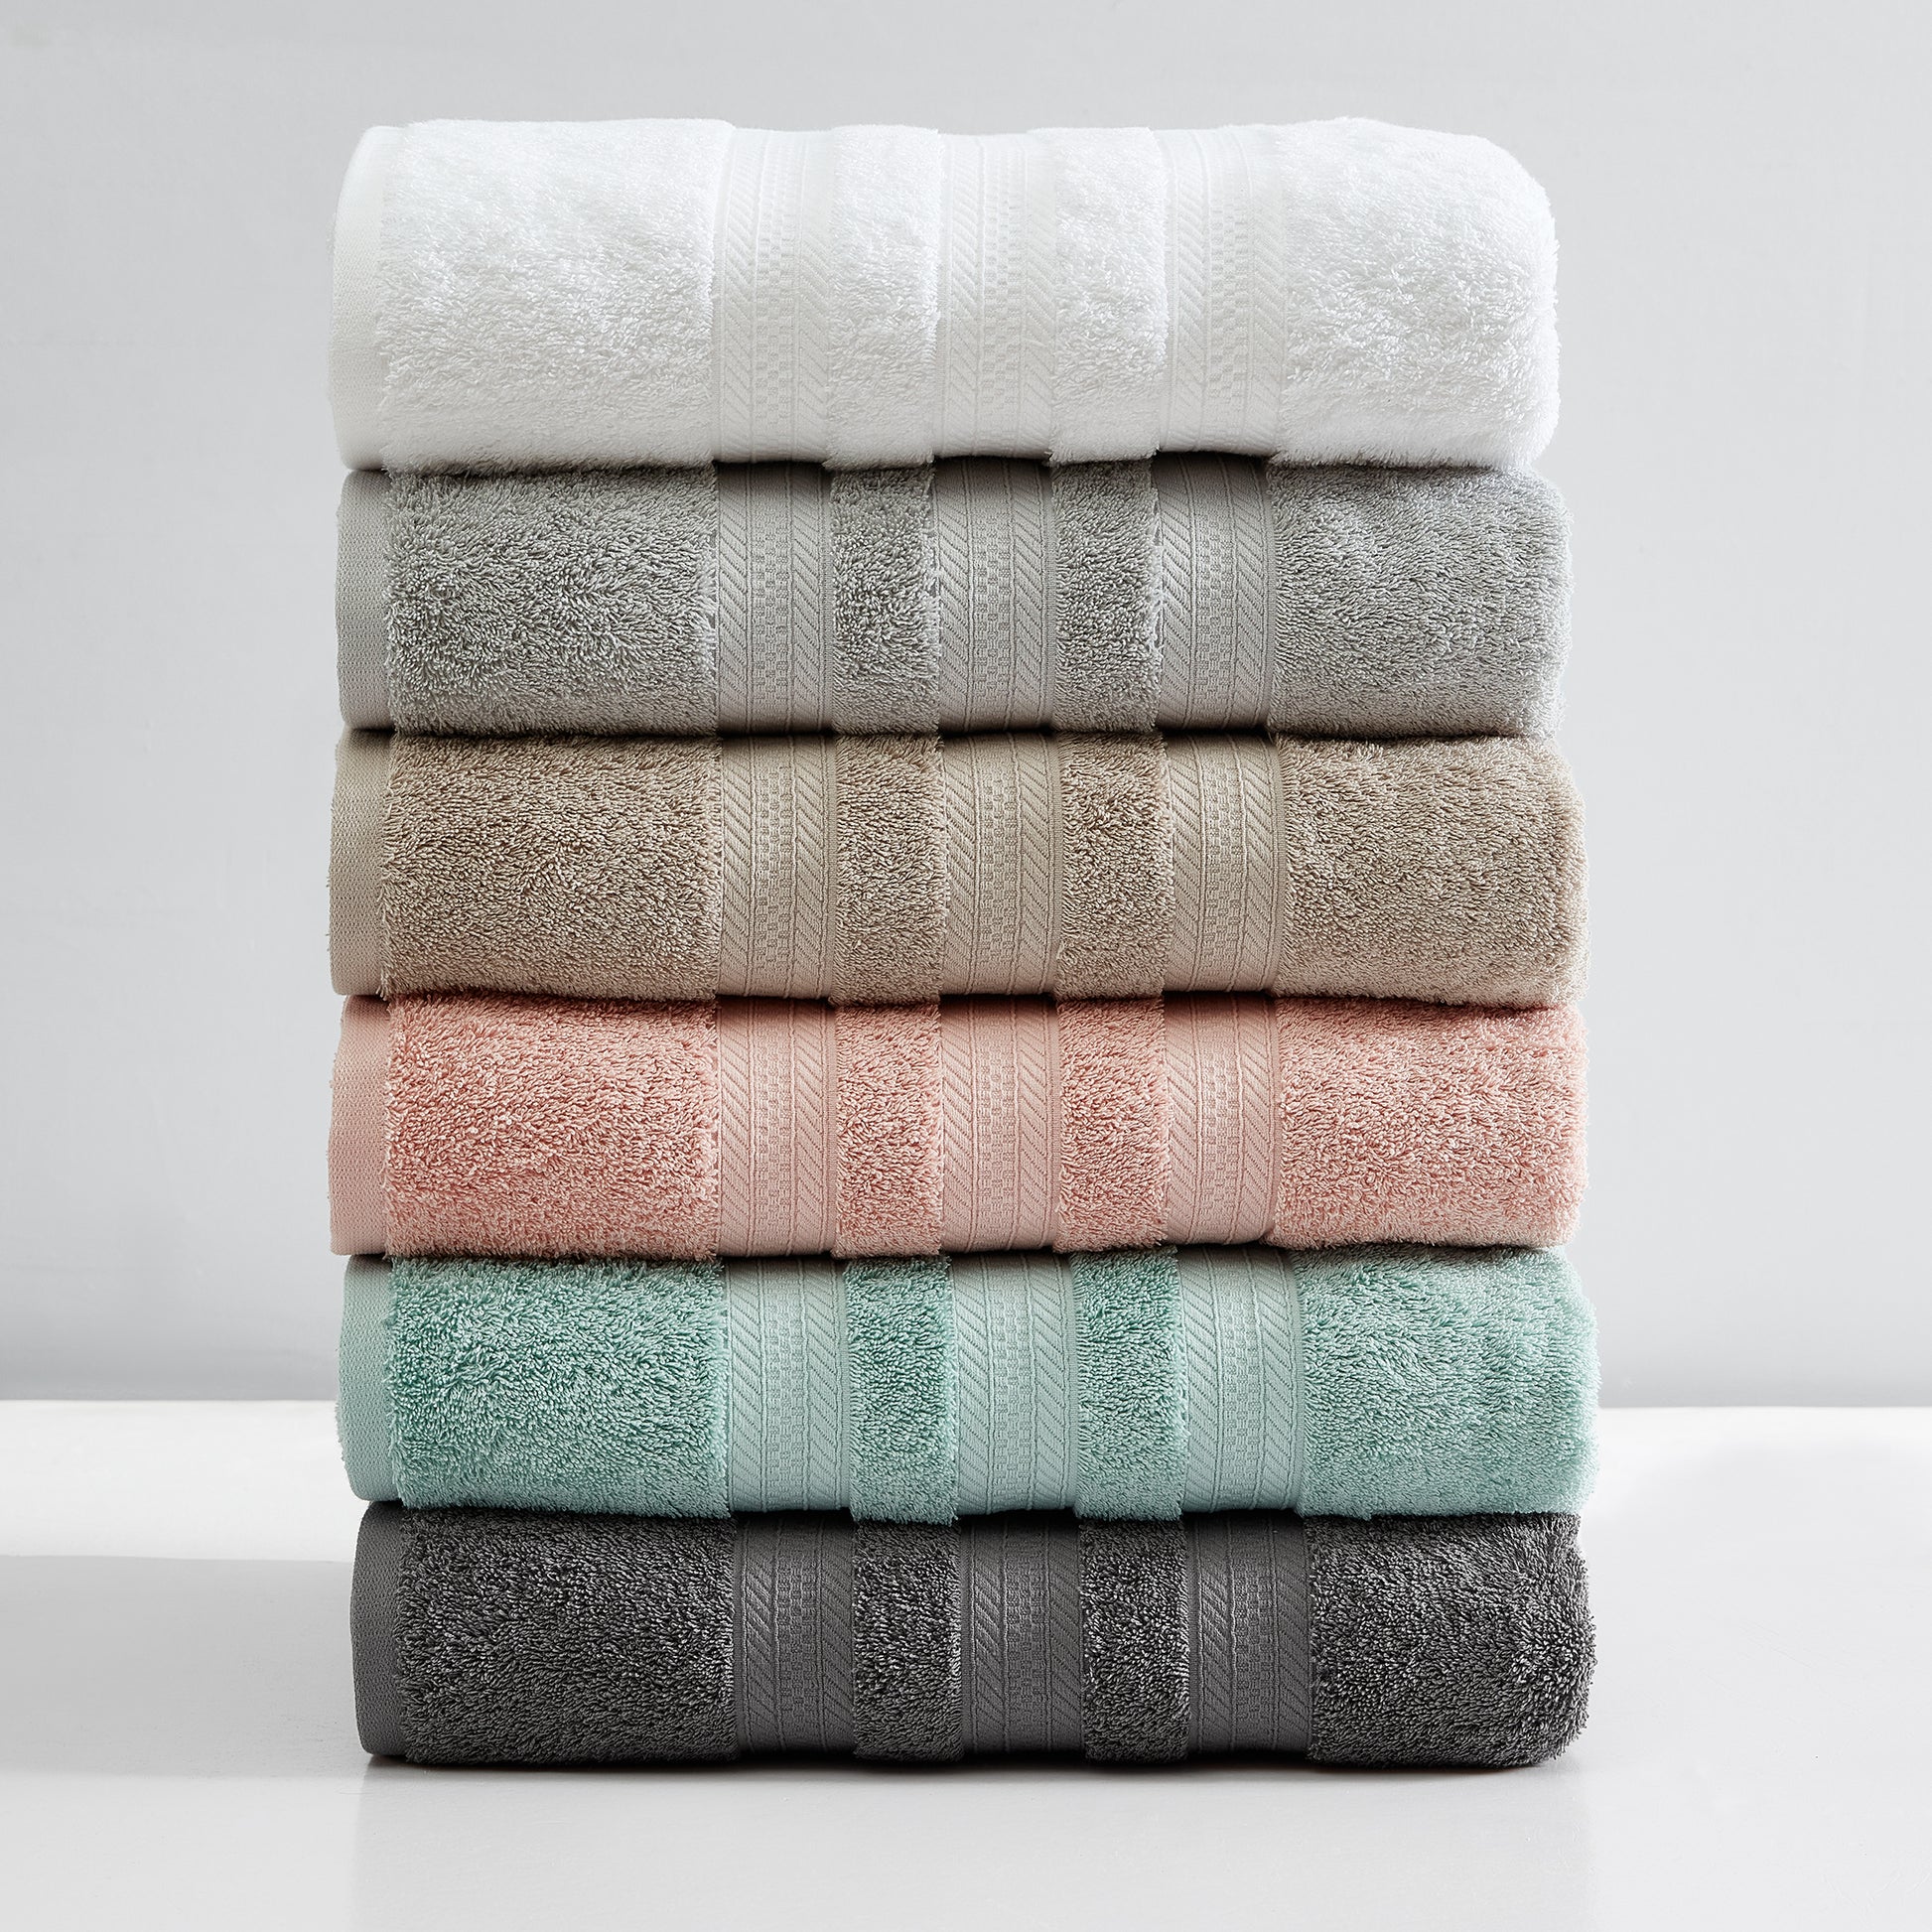 YTYC Towels,39x78 Inch Oversized Bath Sheets Towels for Adults Luxury Bath  Towels Extra Large Sets for Bathroom Super Soft Highly Absorbent Microfiber